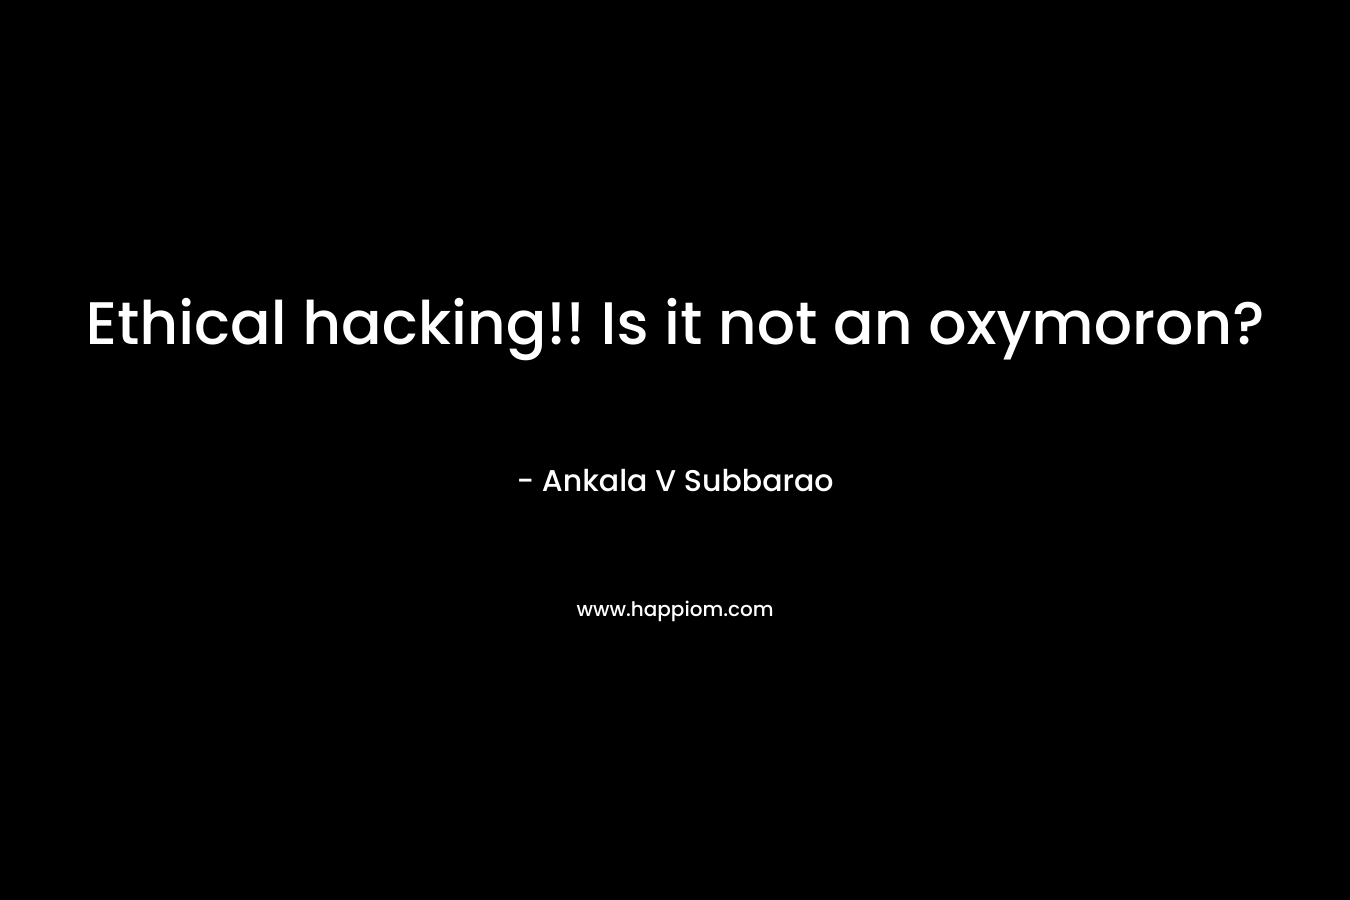 Ethical hacking!! Is it not an oxymoron?